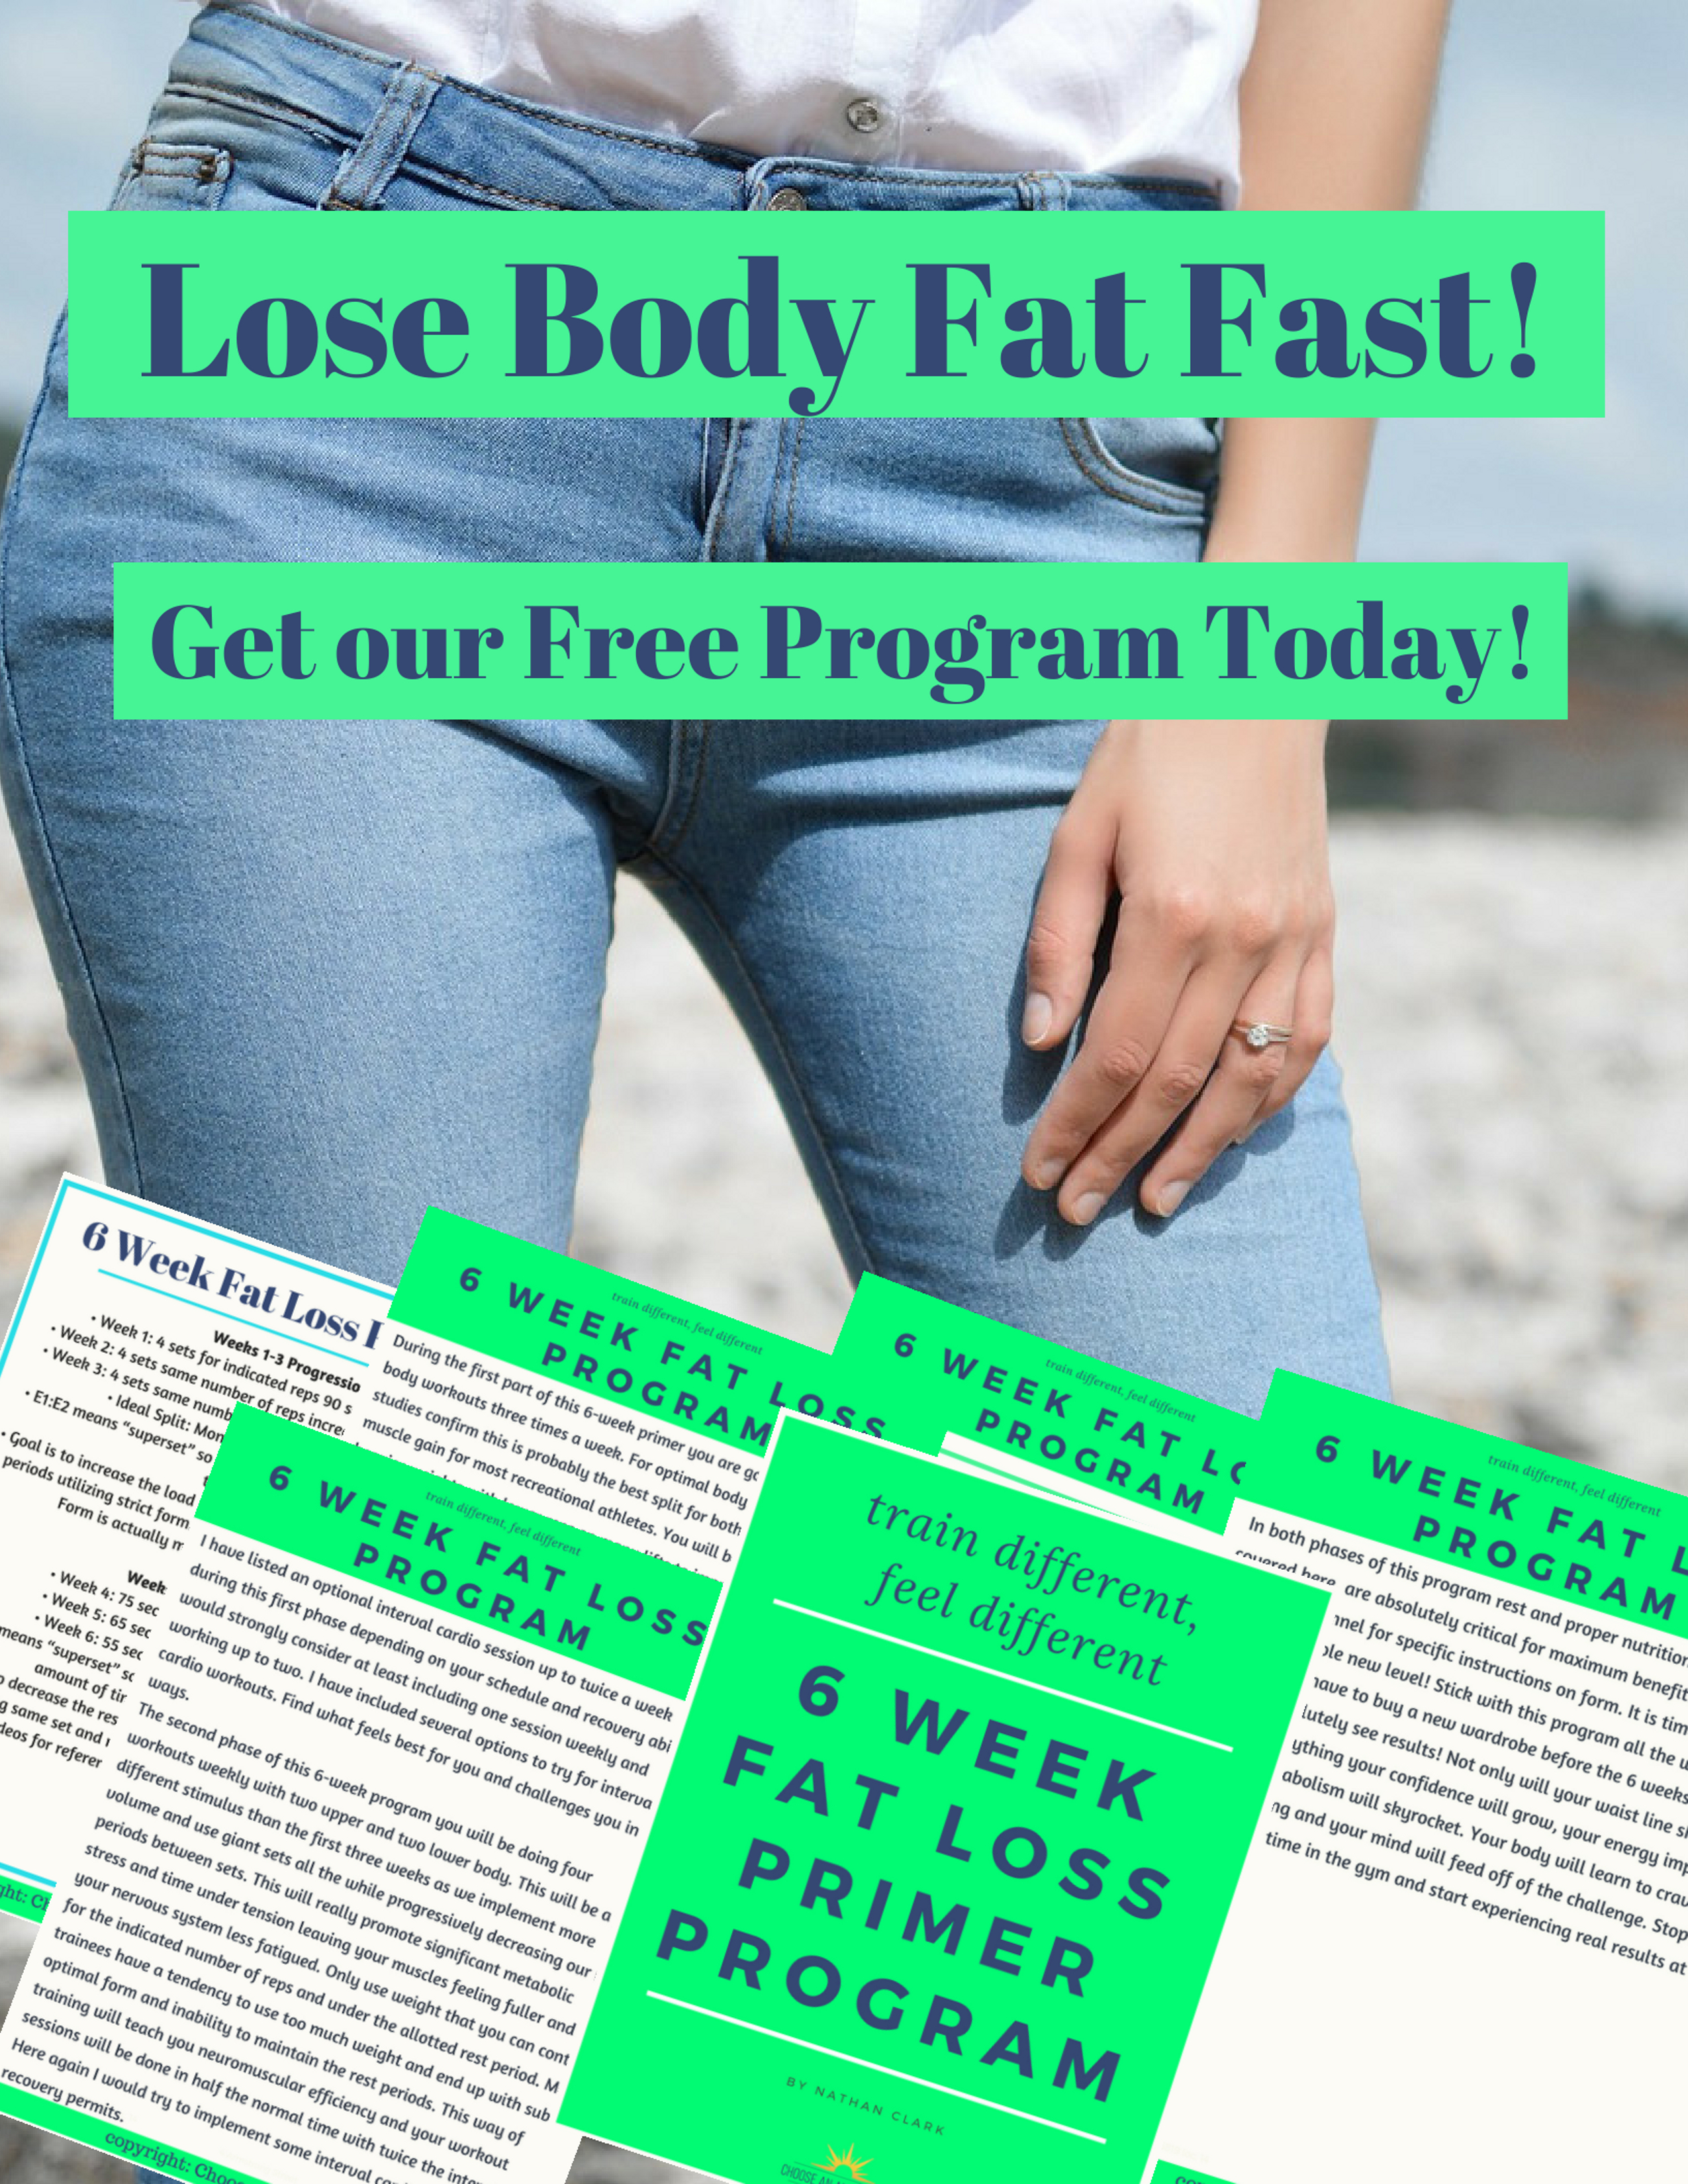 Losing body fat can be a very discouraging thing. Try out our free 6 week program and start seeing the fat melt away!